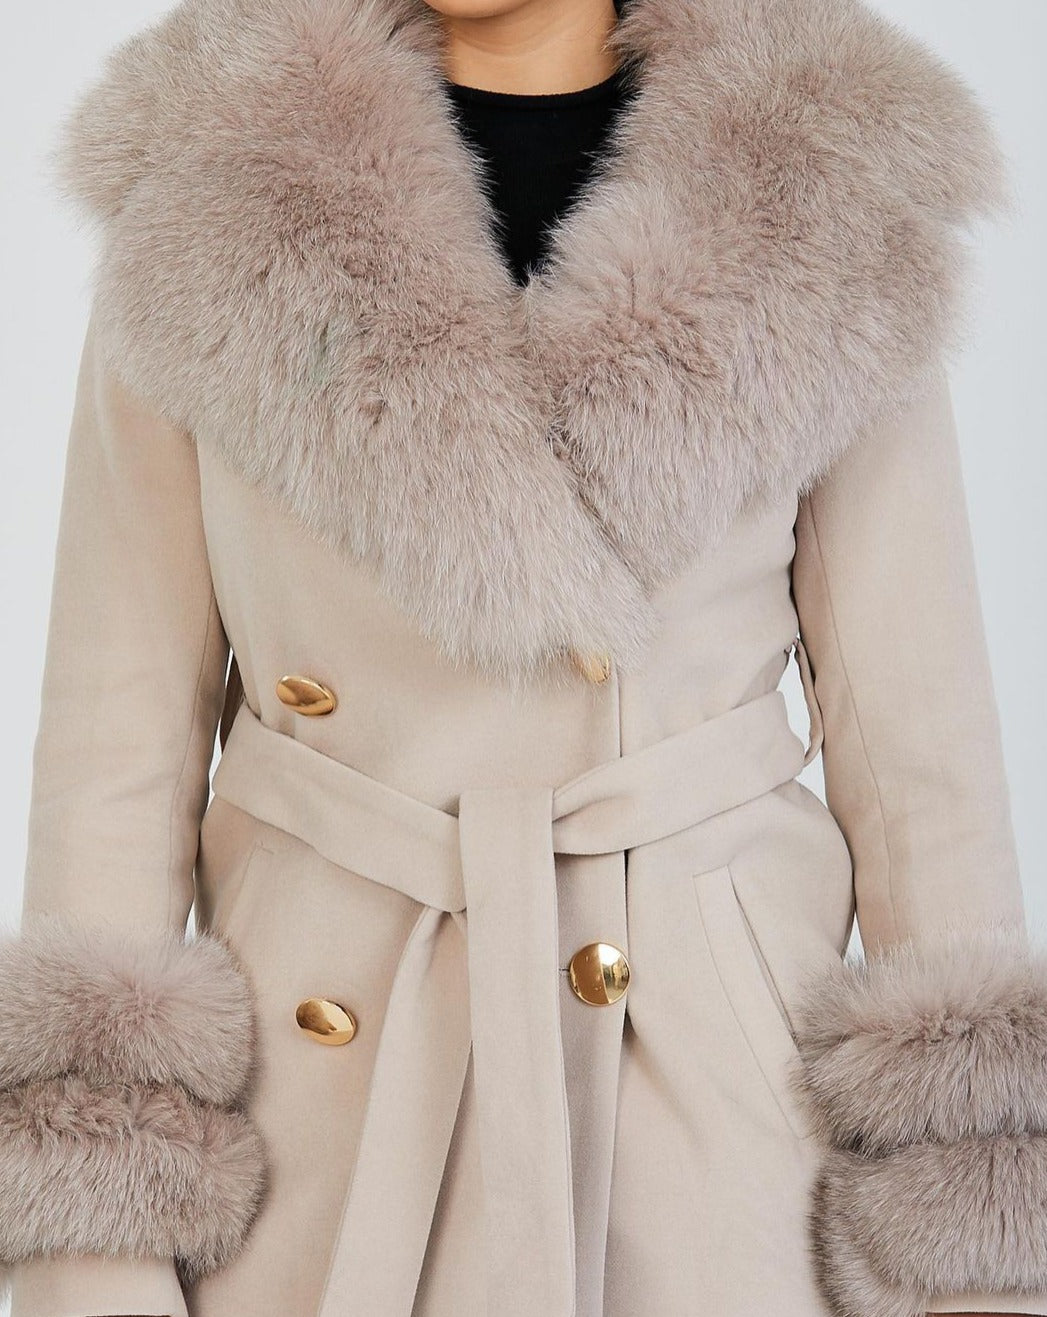 Close up of Elegant GLORIA BEIGE Coat with Luxurious Fox Fur Collar and Cuffs